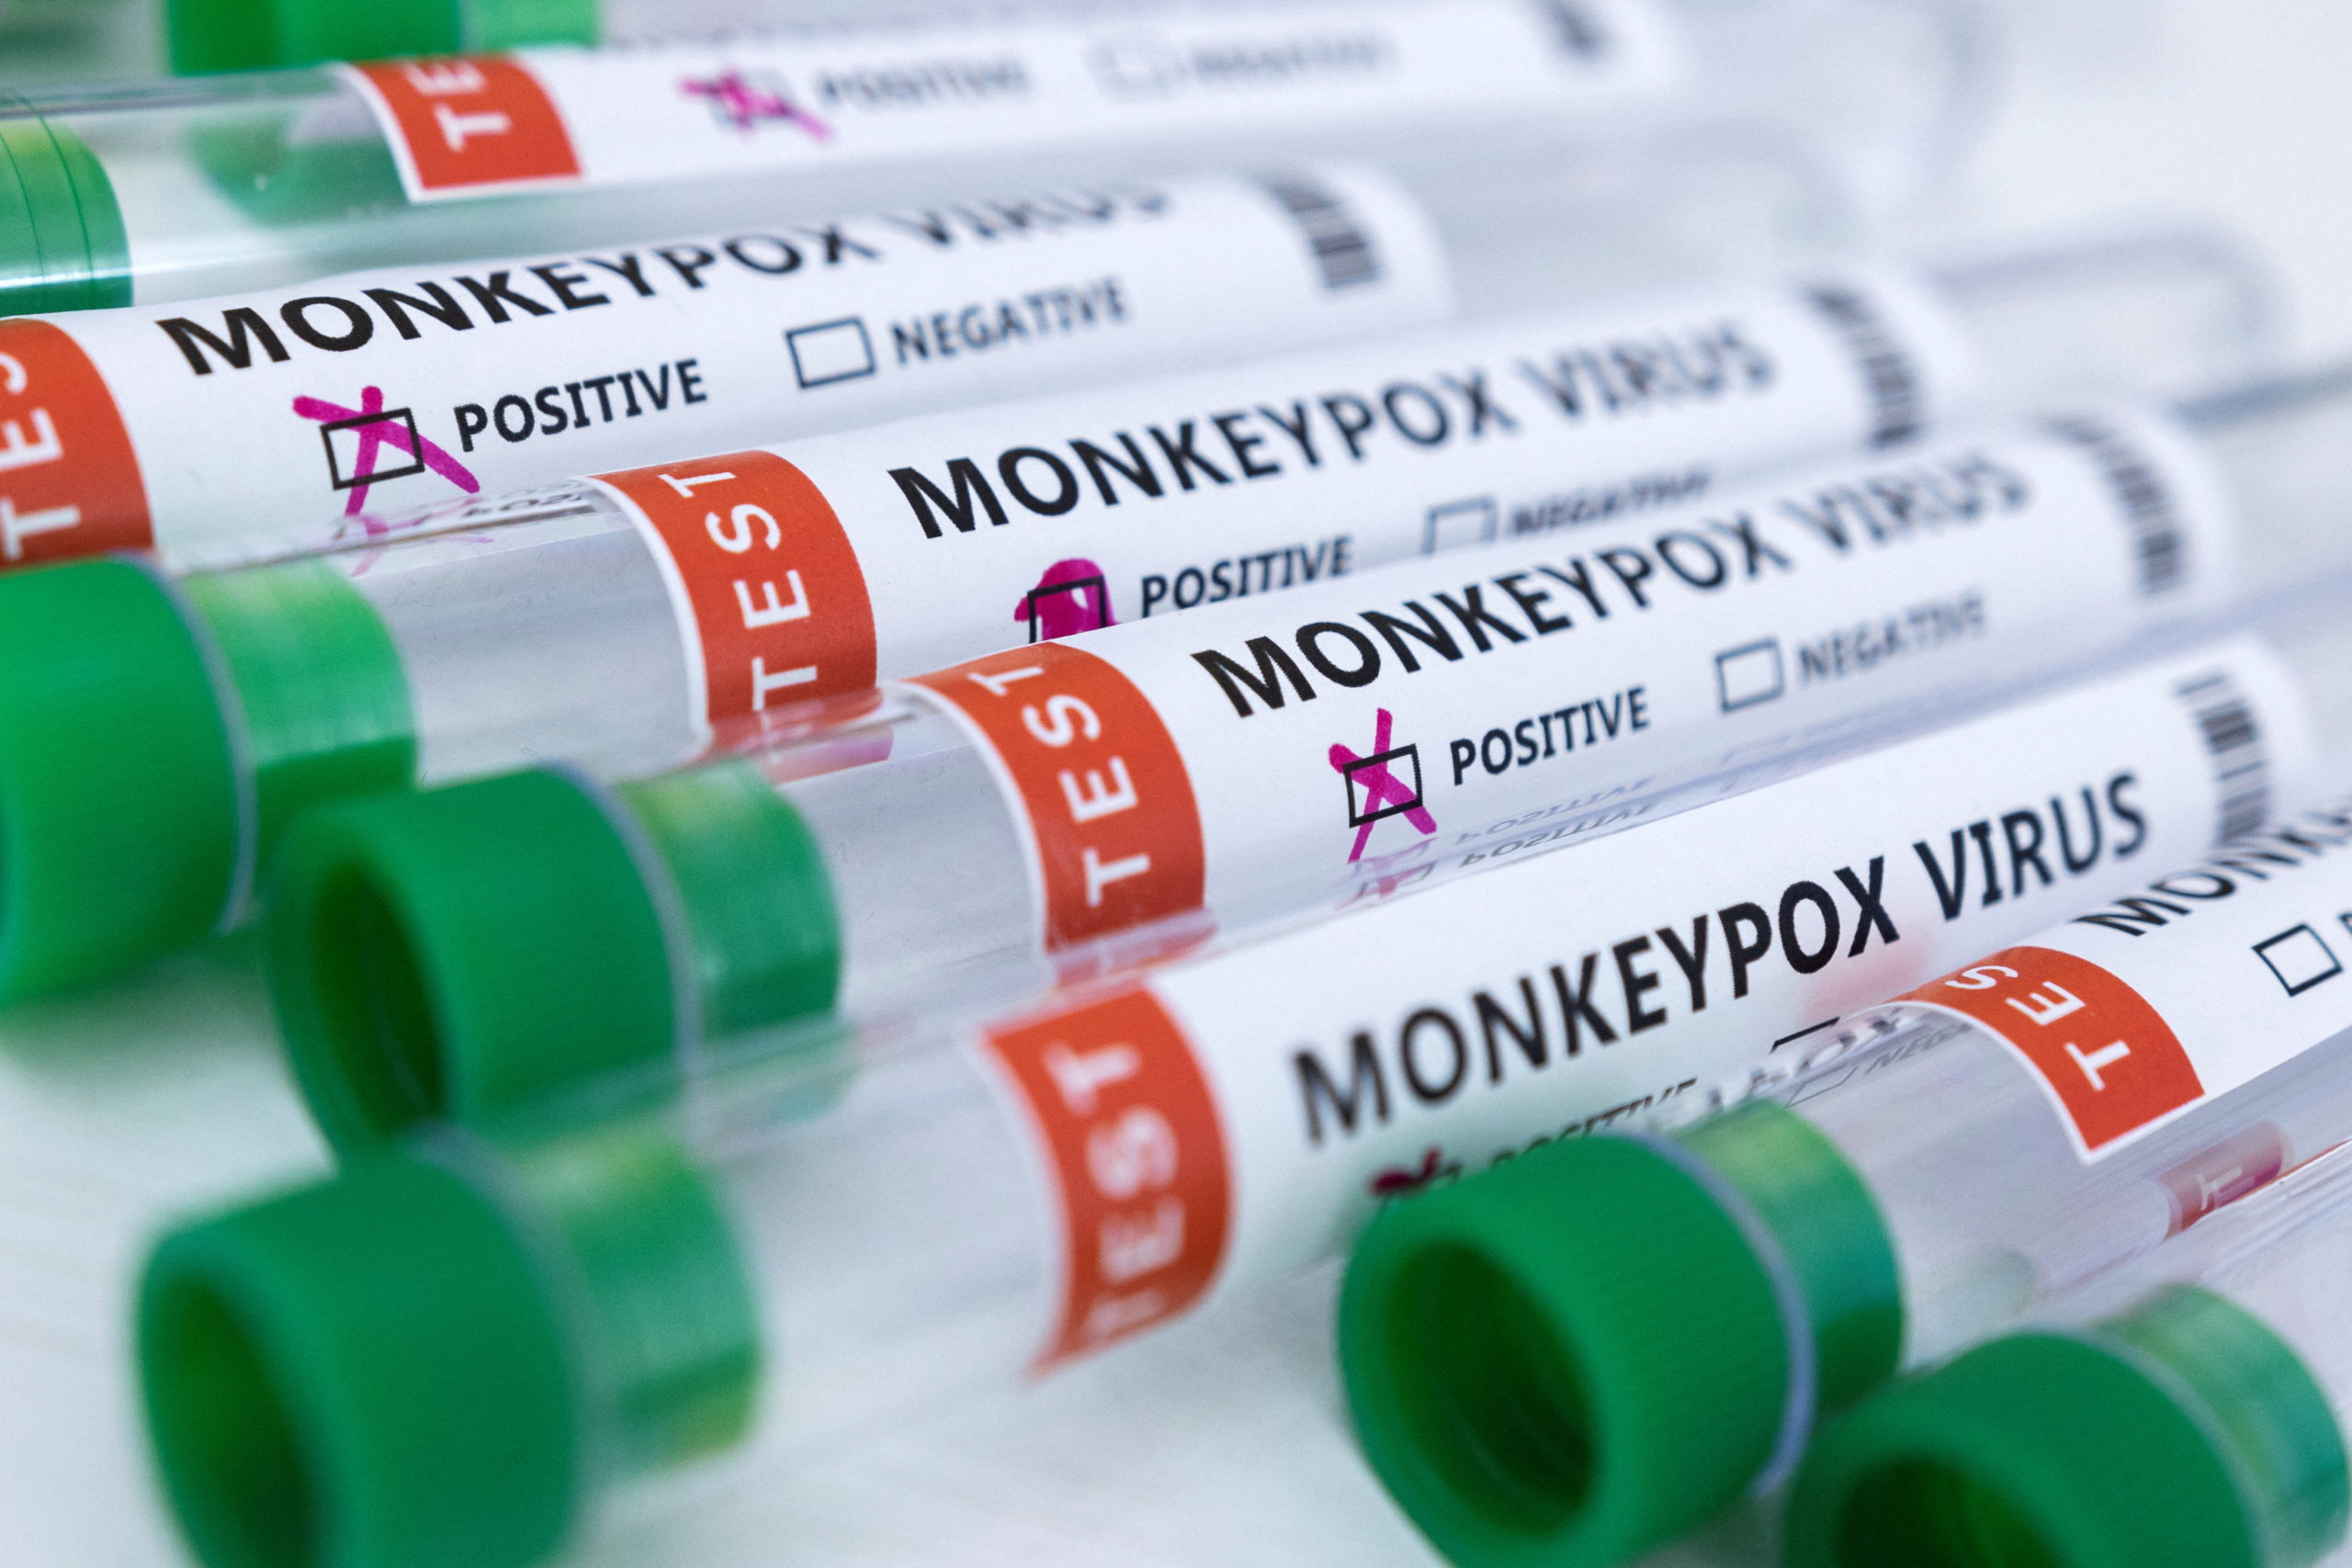 FILE PHOTO: Test tubes labelled "Monkeypox virus positive and negative" are seen in this illustration taken May 23, 2022. REUTERS/Dado Ruvic/Illustration doh monkeypox vaccine